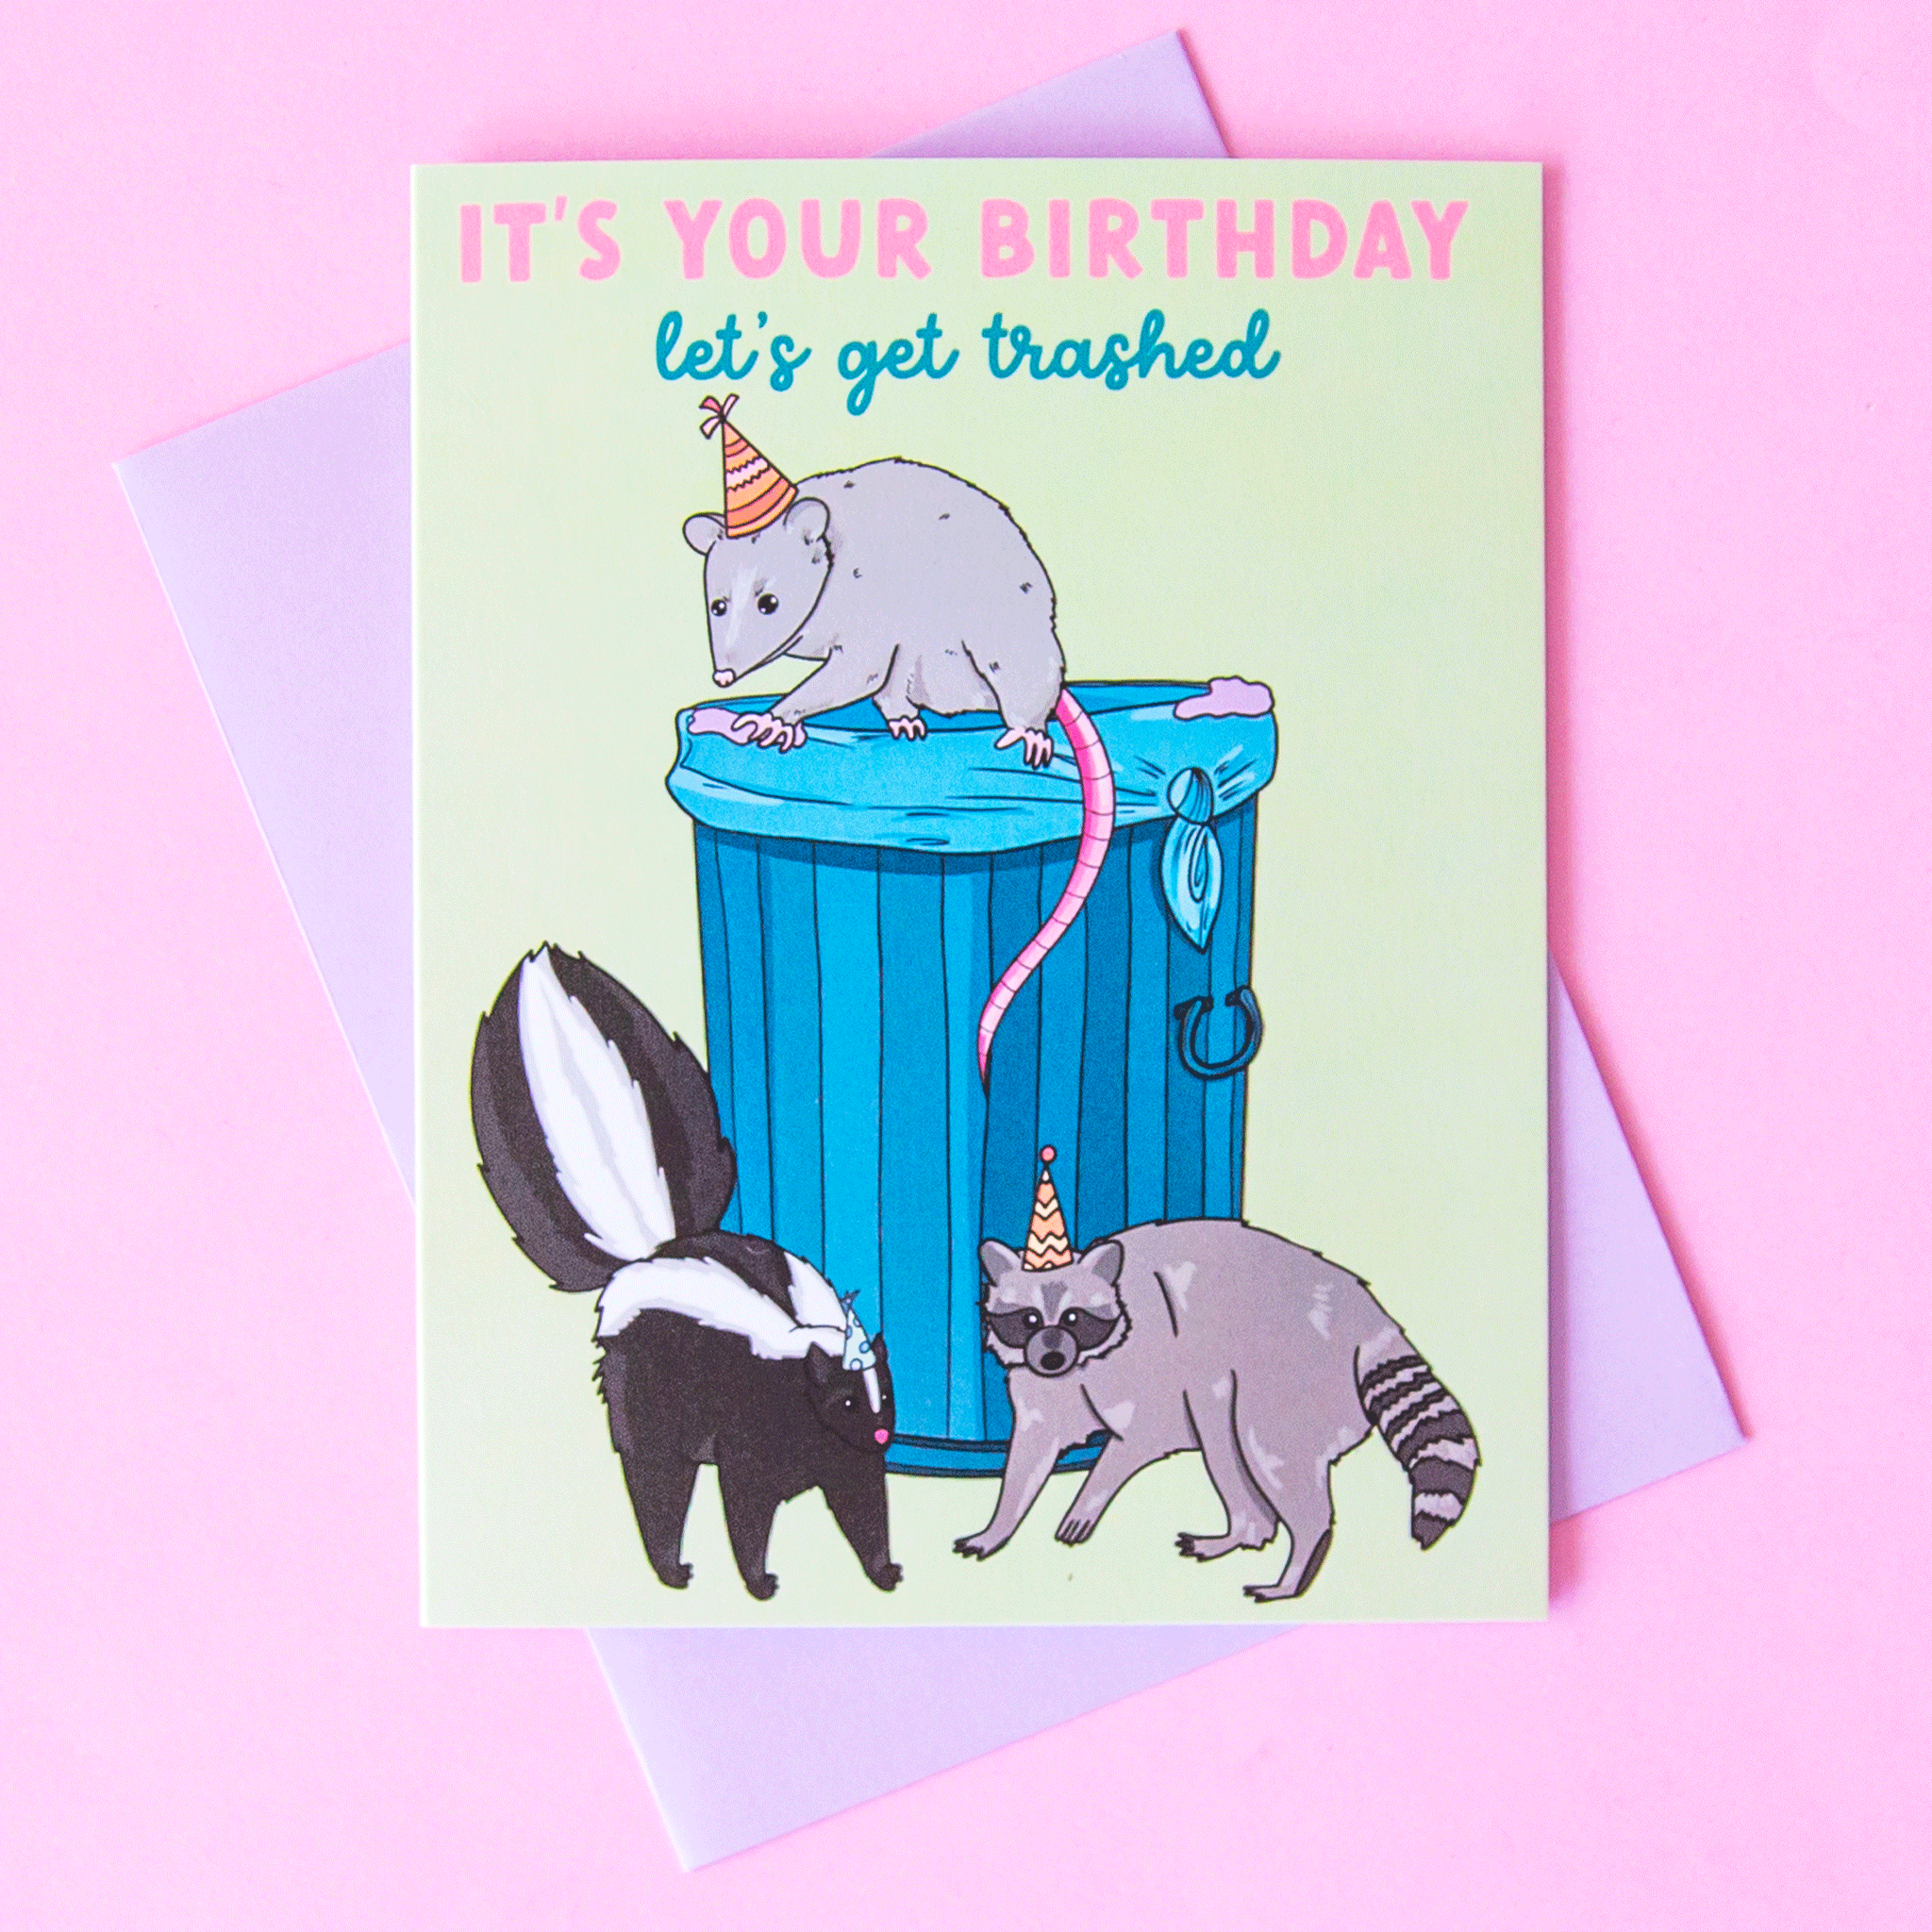 This card reads, "It's Your Birthday Let's Get Trashed" accompanied by an illustration of a possum, skunk and raccoon wearing birthday hats surrounding a trash can.